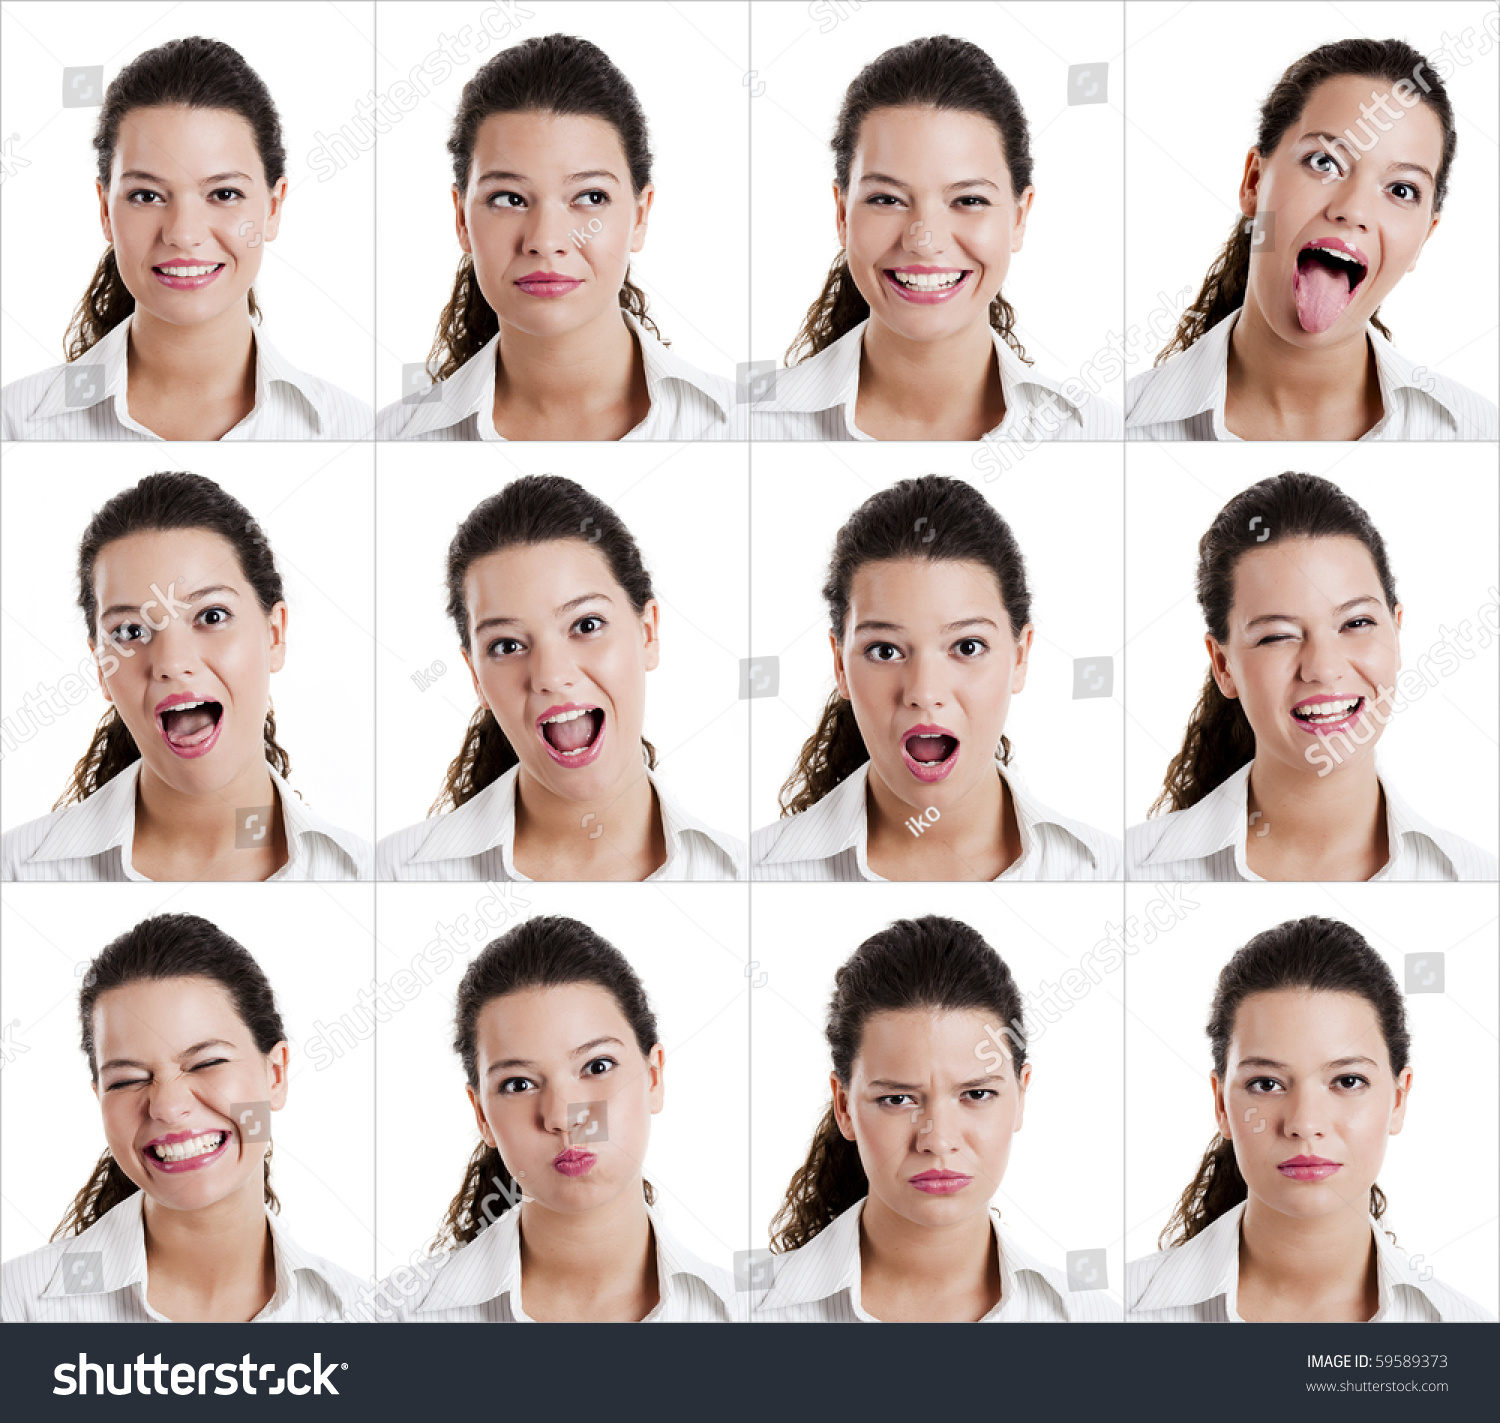 Collage Same Woman Making Diferent Expressions Stock Photo 59589373 ...